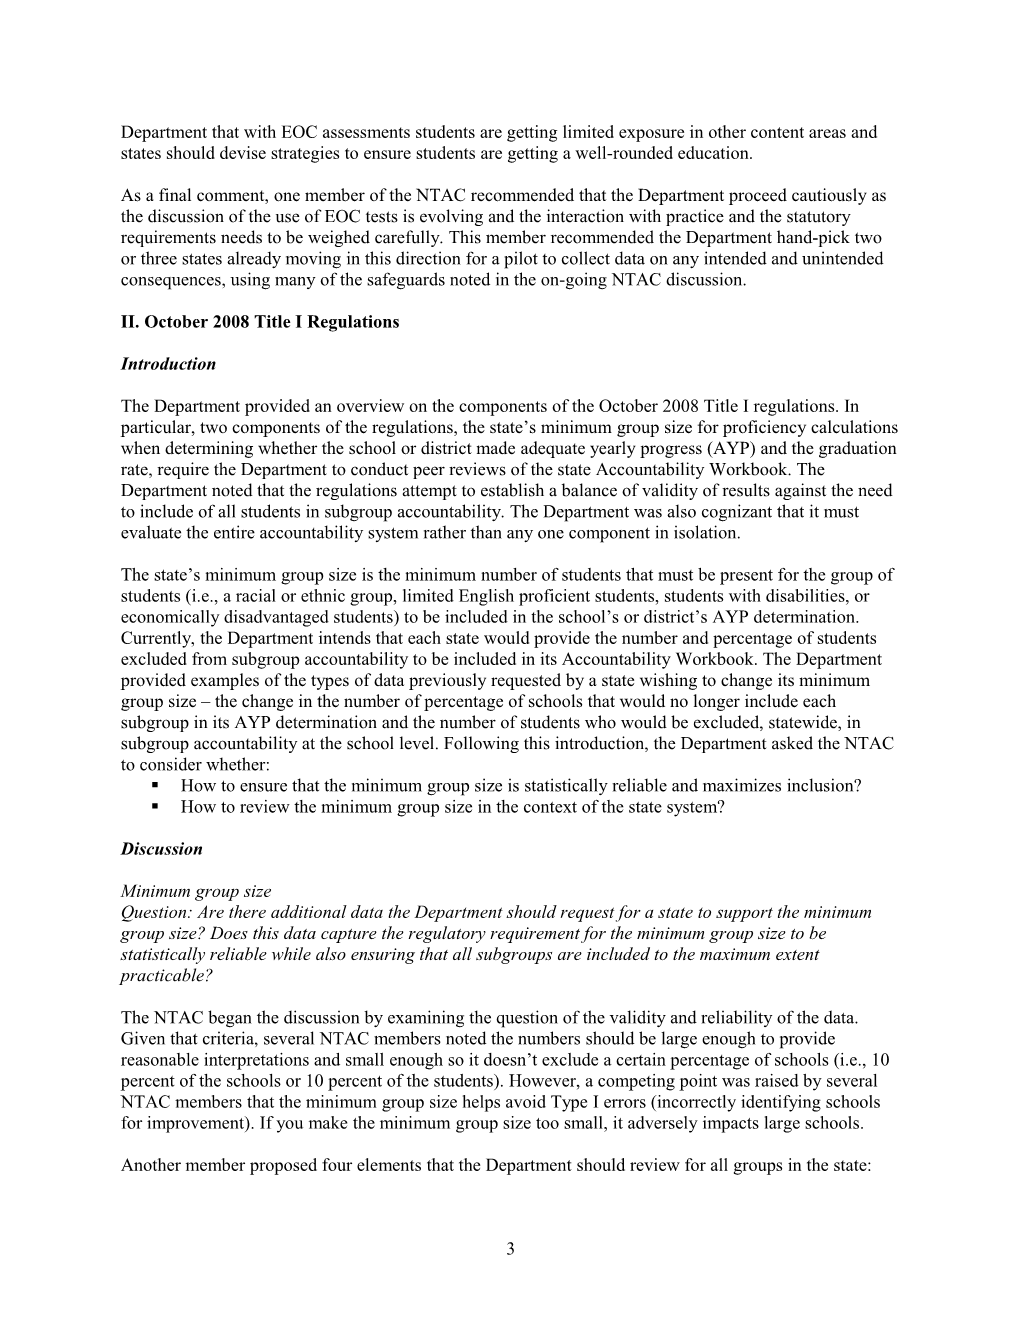 Archived: National Technical Advisory Council (NTAC) November 20, 2008 Meeting Summary (MS WORD)